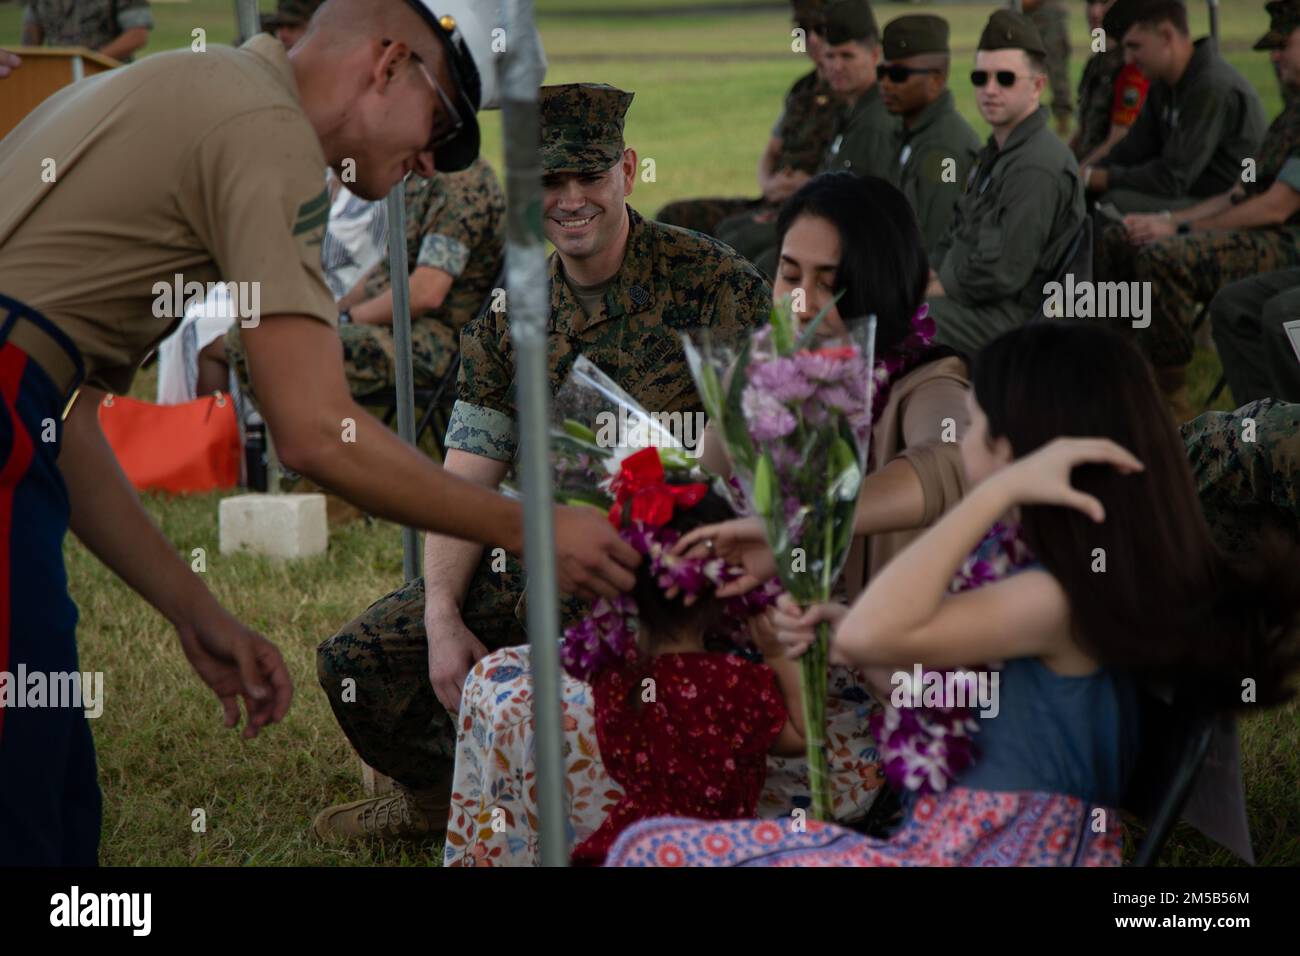 U.S. Marines with Marine Unmanned Aerial Vehicle Squadron (VMU) 3, give flowers and lei to Sgt. Maj. Andrew Radford's family as a welcome to VMU-3 during a relief and appointment ceremony at Marine Corps Base Hawaii, Hawaii, Feb. 18th, 2022. During the ceremony Sgt. Maj. Andrew Radford relieved Sgt. Maj. Alejandro Garcia as Sergeant Major of VMU-3. The ceremony symbolizes the passing of trust and confidence from the outgoing Sergeant Major to the incoming Sergeant Major. Stock Photo